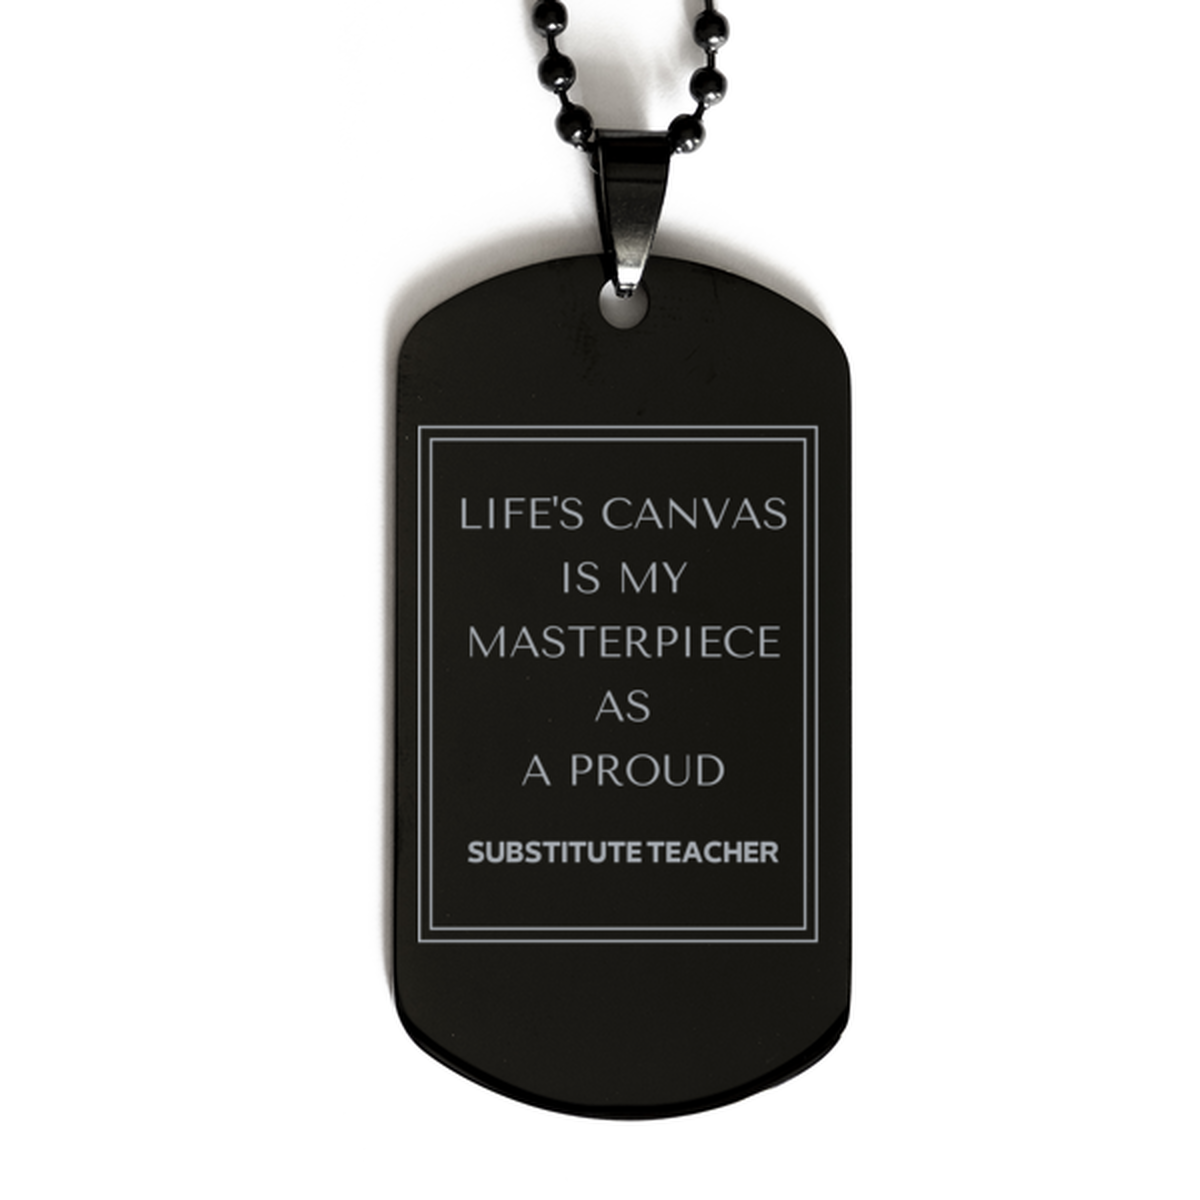 Proud Substitute Teacher Gifts, Life's canvas is my masterpiece, Epic Birthday Christmas Unique Black Dog Tag For Substitute Teacher, Coworkers, Men, Women, Friends